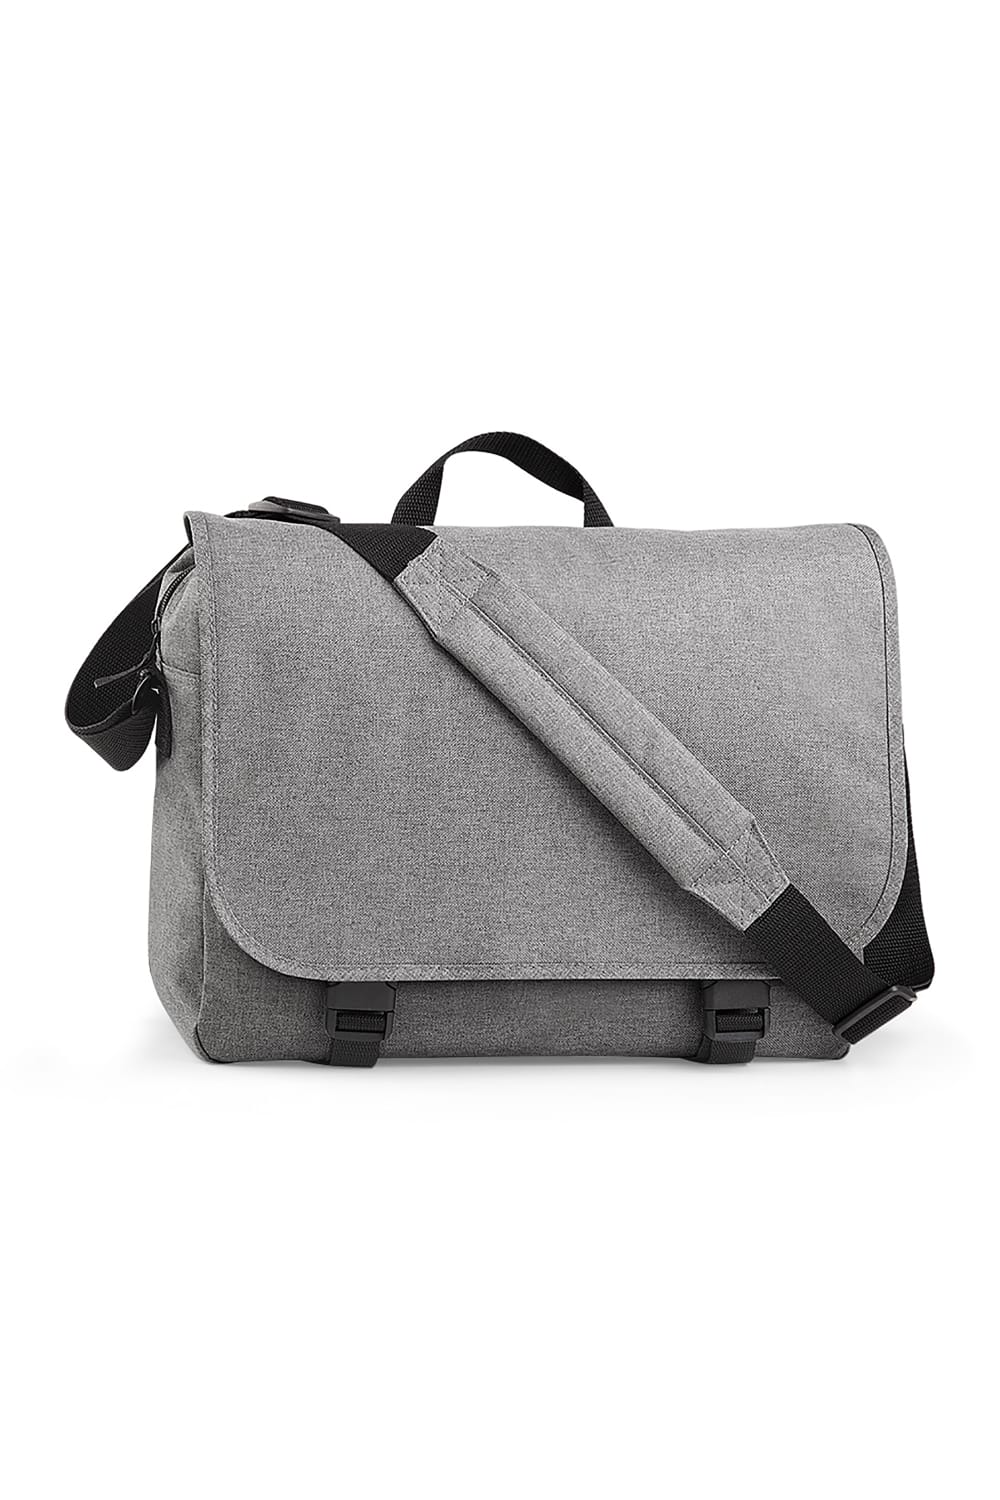 BagBase Two-tone Digital Messenger Bag (Up To 15.6inch Laptop Compartment) (Grey Marl) (One Size)